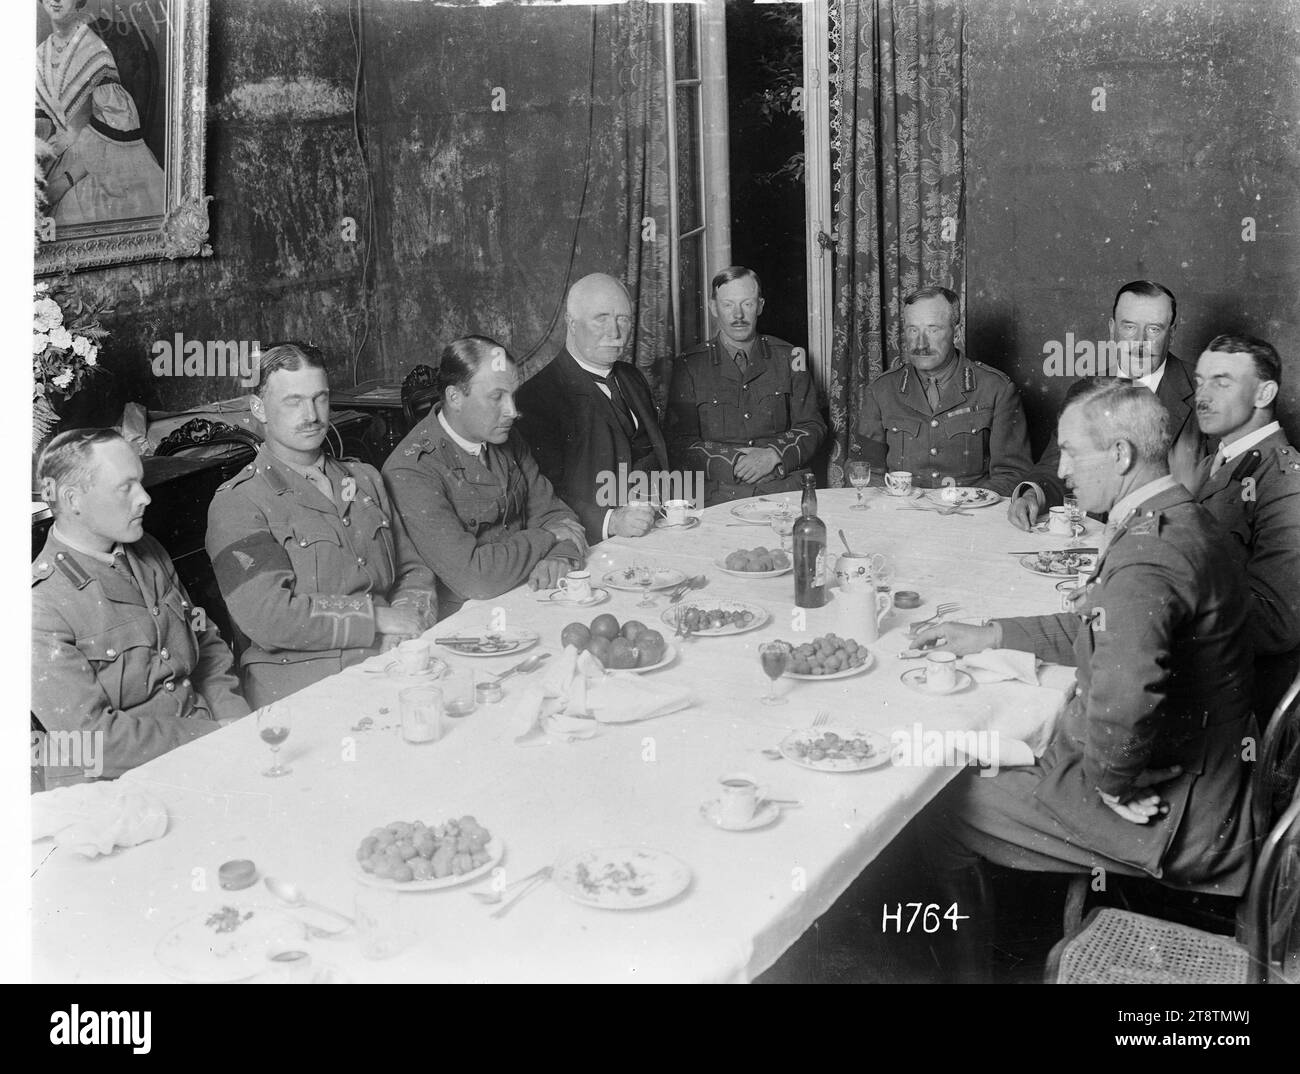 Prime Minister William Massey, at dinner with World War I Divisional Headquarters staff in Authie, France, Prime Minister William Massey (4th from left), at dinner with World War 2 Divisional Headquarters staff including Joseph Ward (7th from left) at Authie, France, in June 1918. Shows nine men seated around a dinner table with plates of fruit and nuts, and cups of coffee Stock Photo